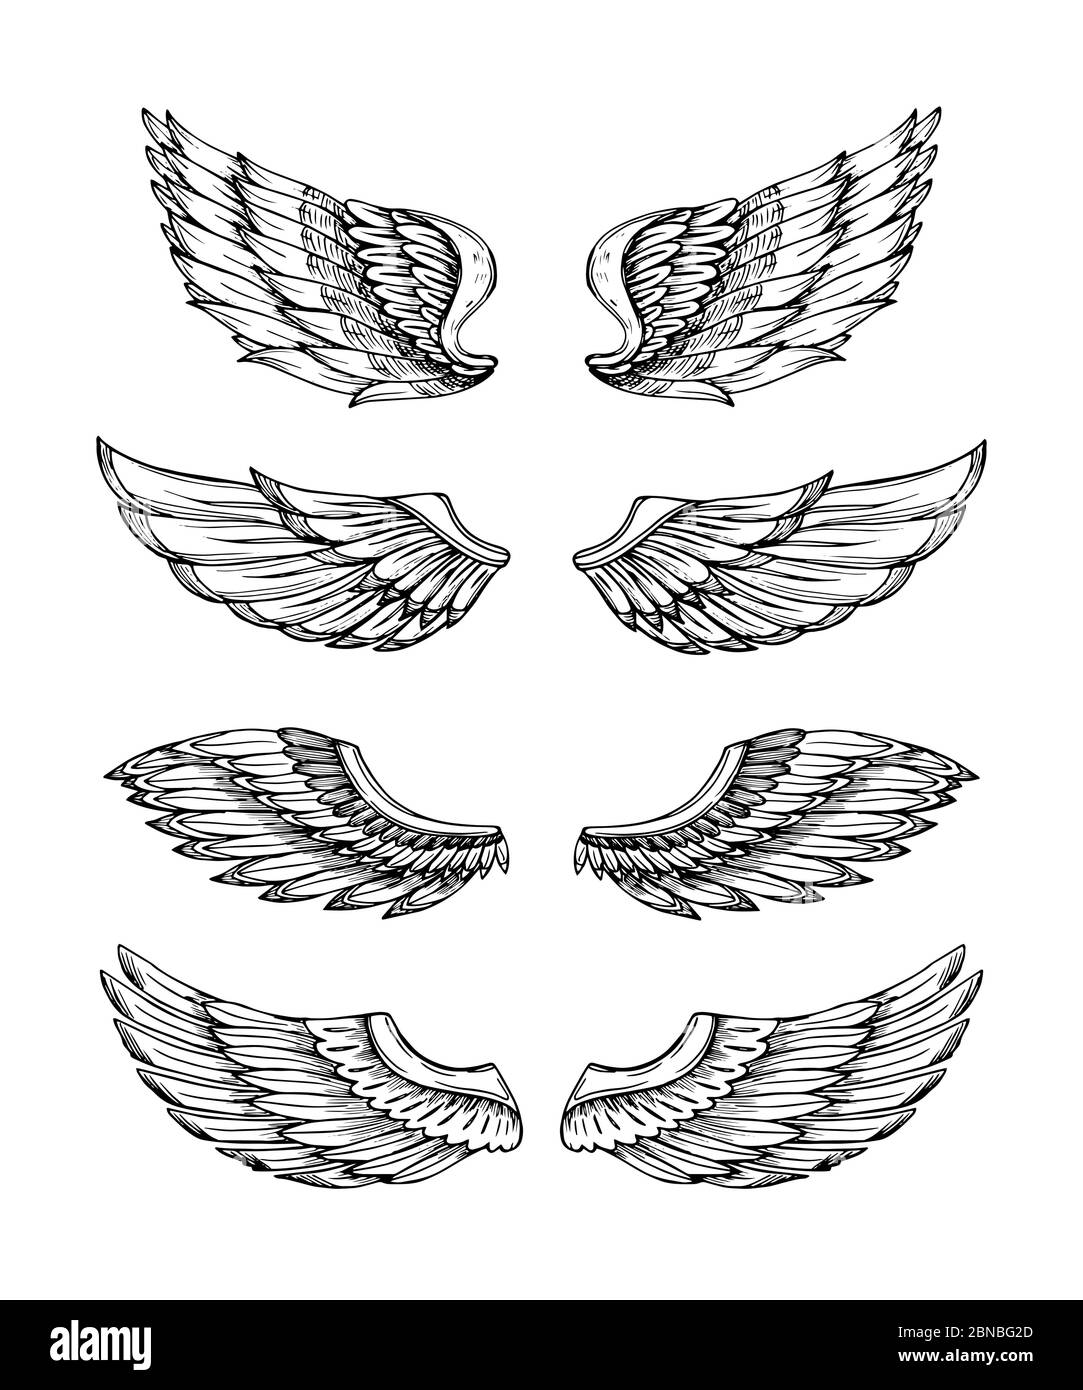 27129 Tribal Tattoo Wings Images Stock Photos  Vectors  Shutterstock